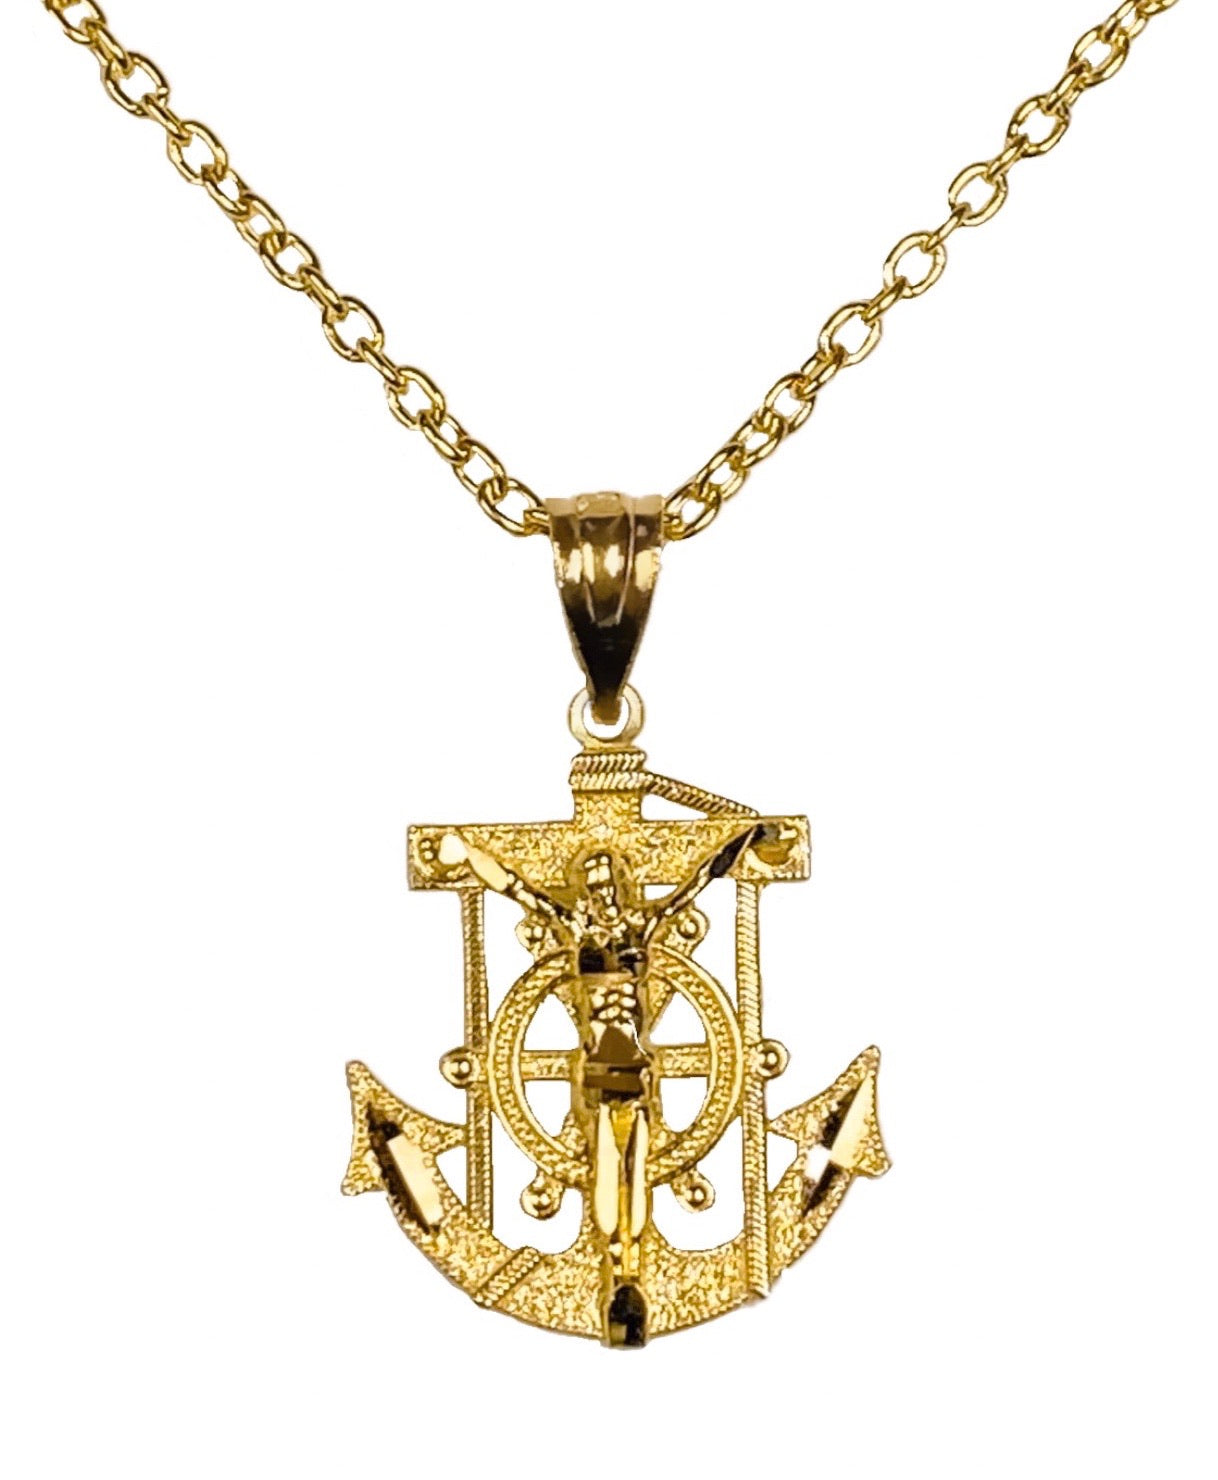 14K YELLOW GOLD ANCHOR NECKLACE